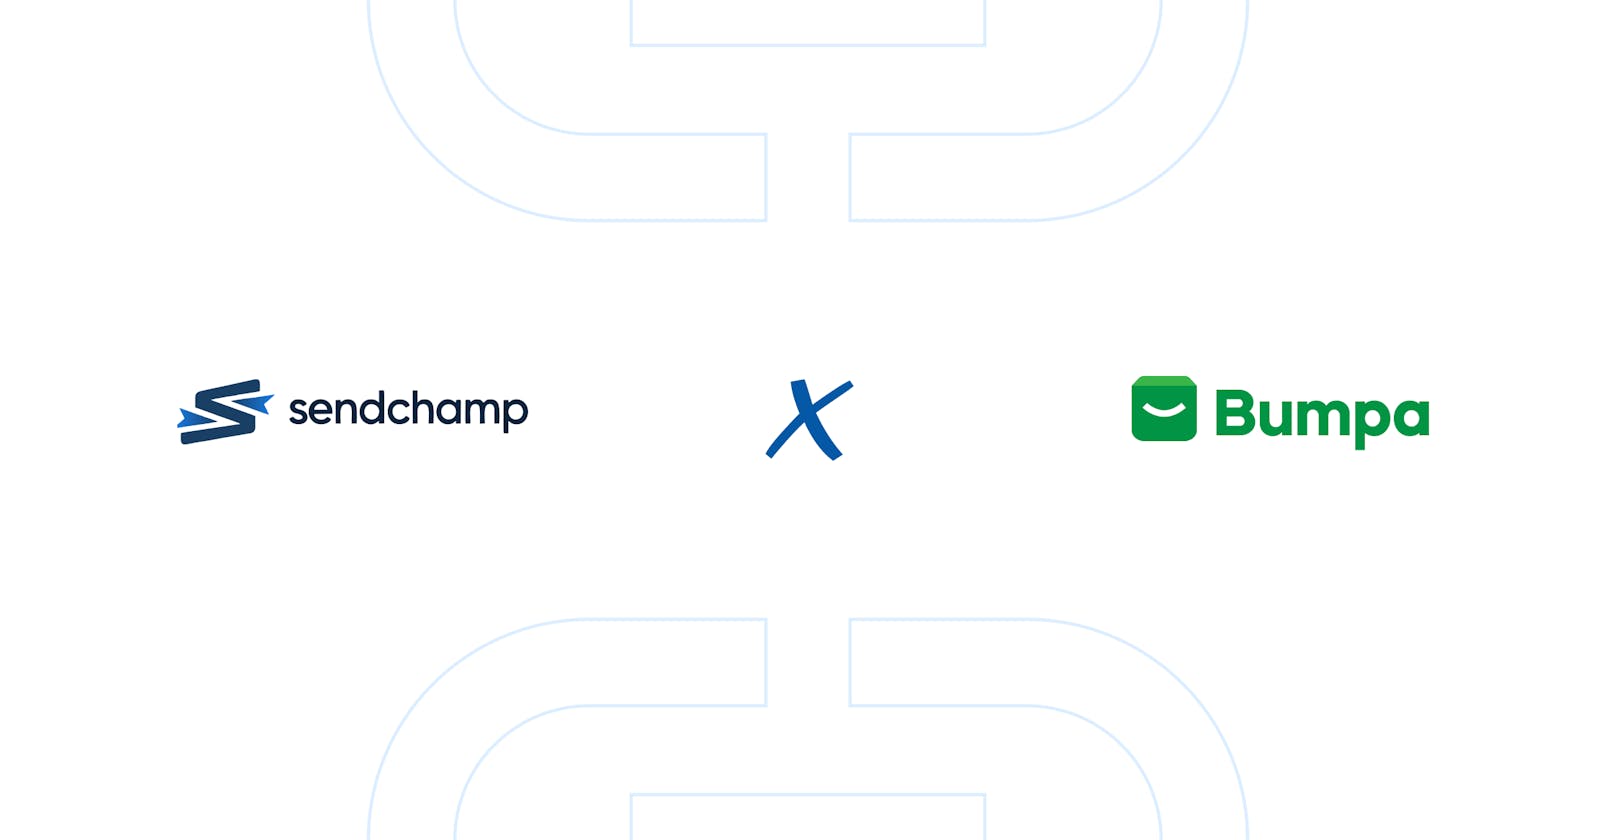 How Bumpa solved the Communication problem for over 25,000 Merchants with Sendchamp